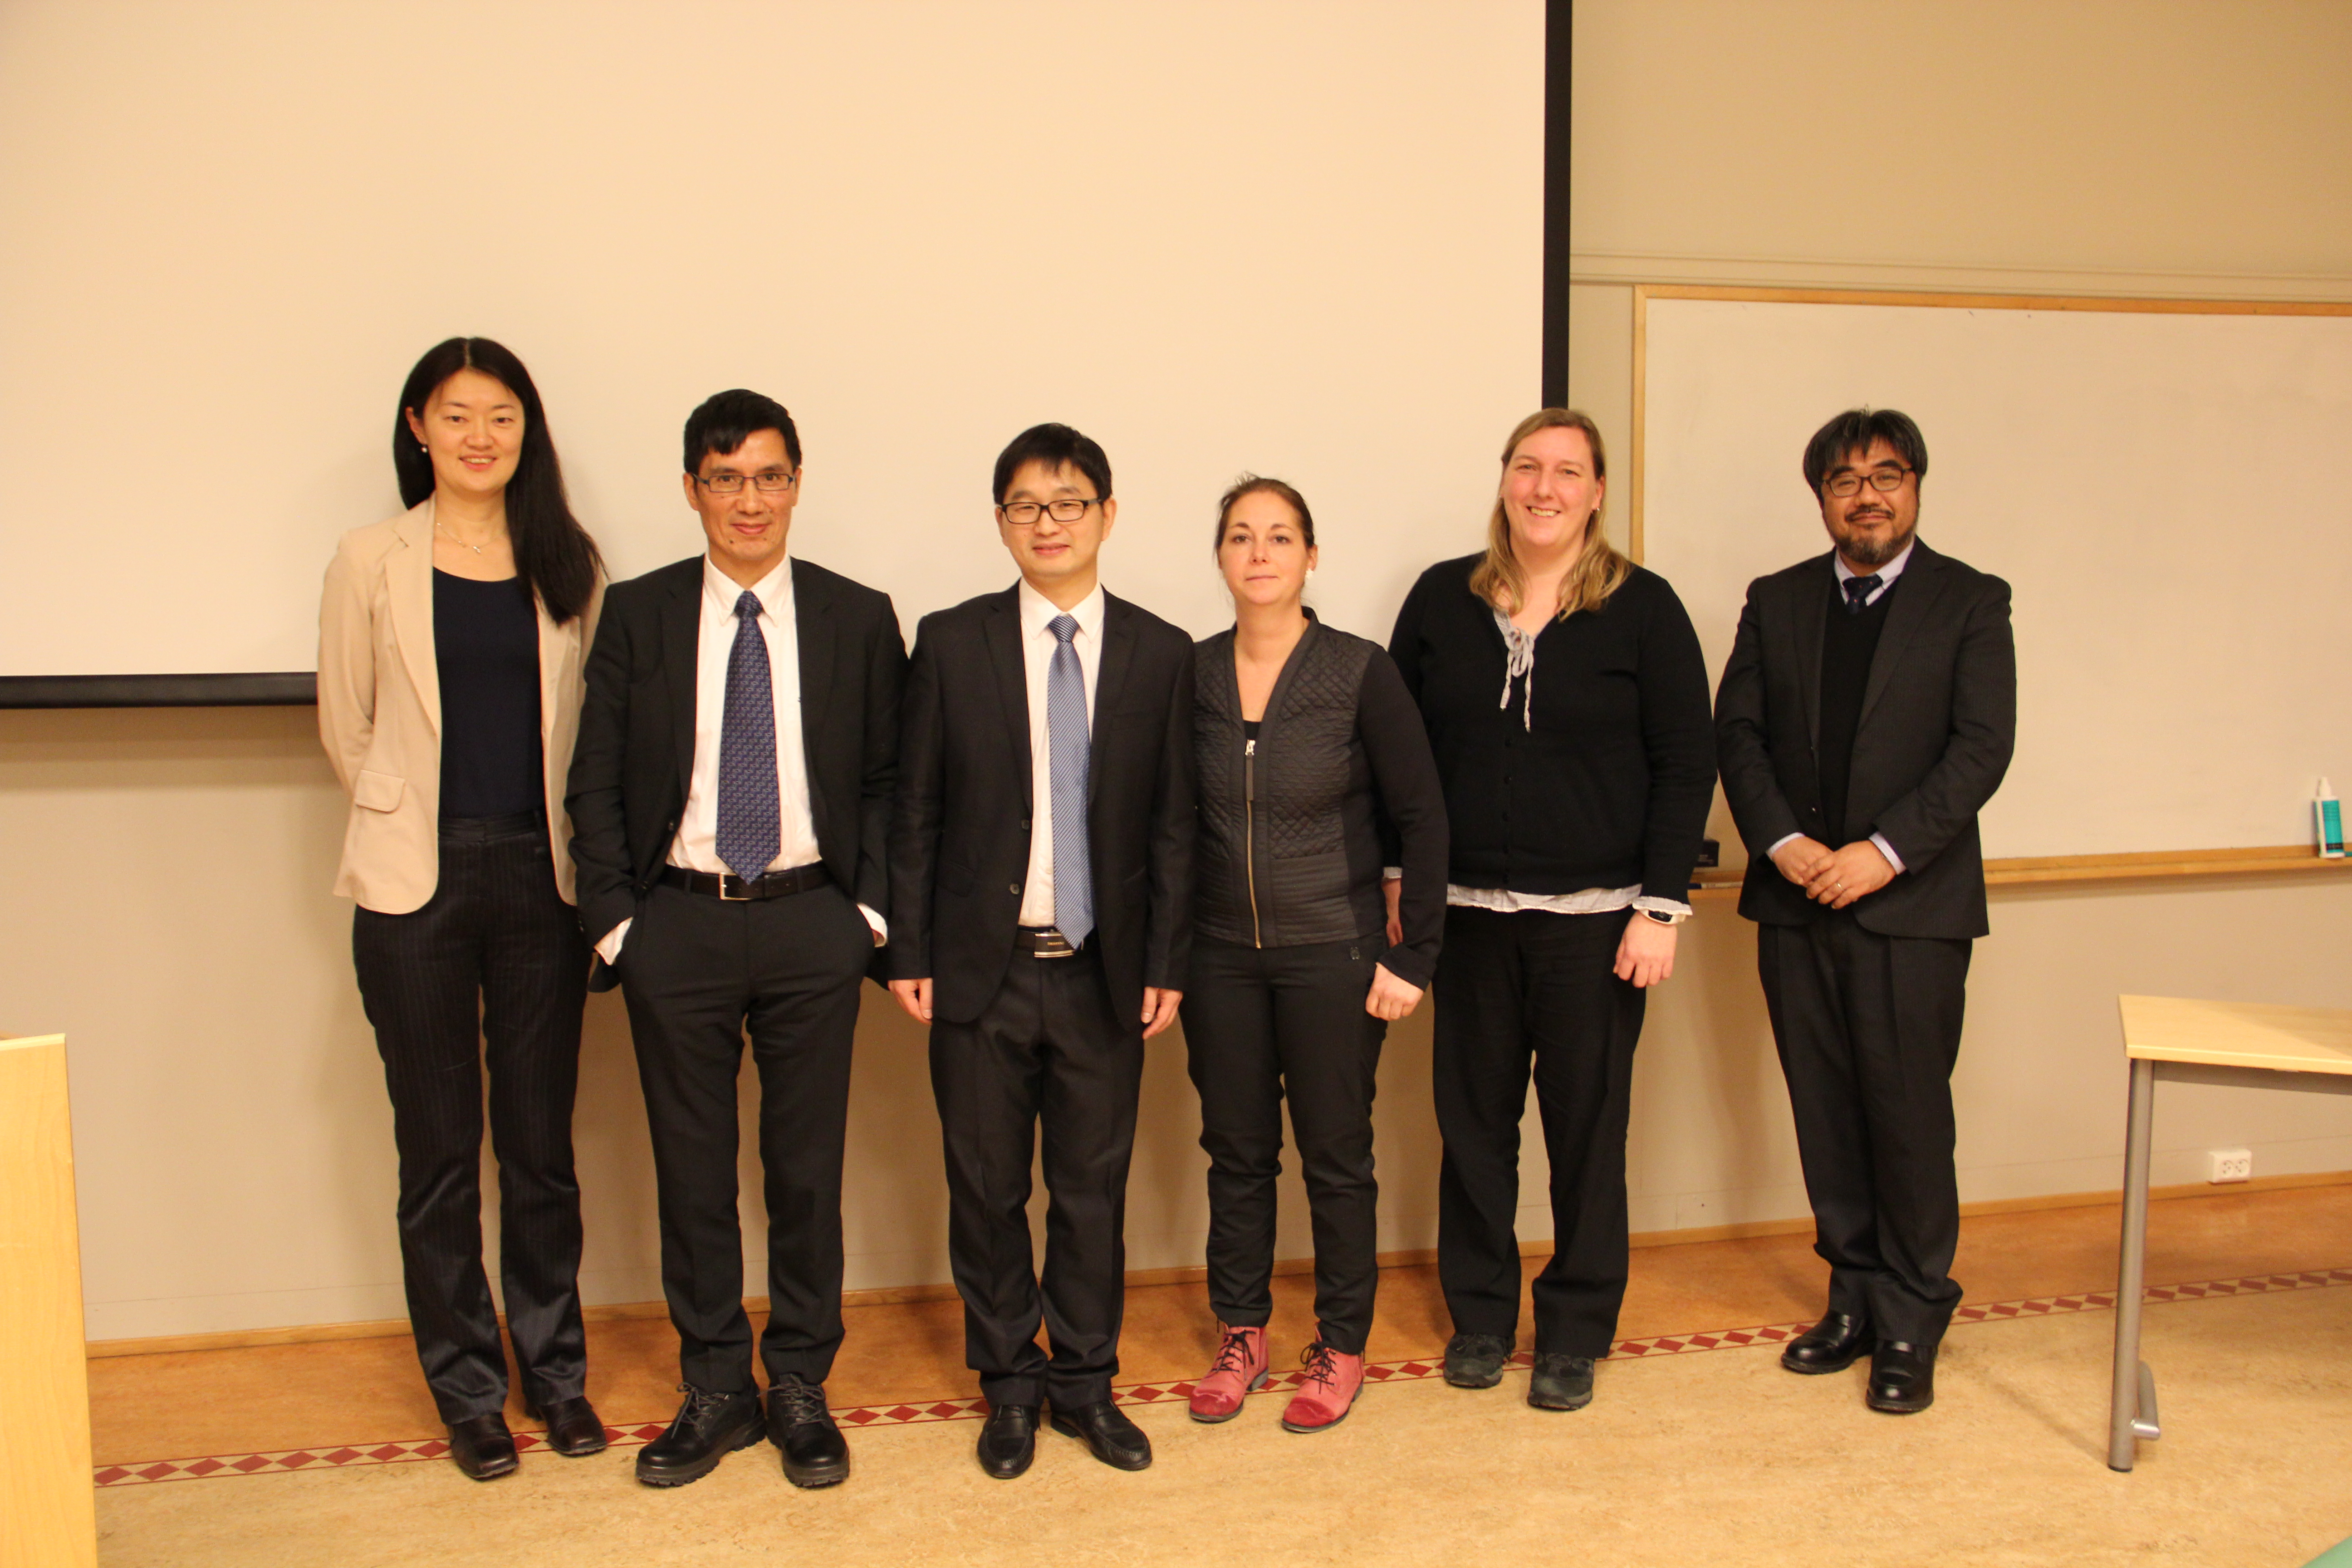 Professors and students standing in front of a projectorscreen. Photo